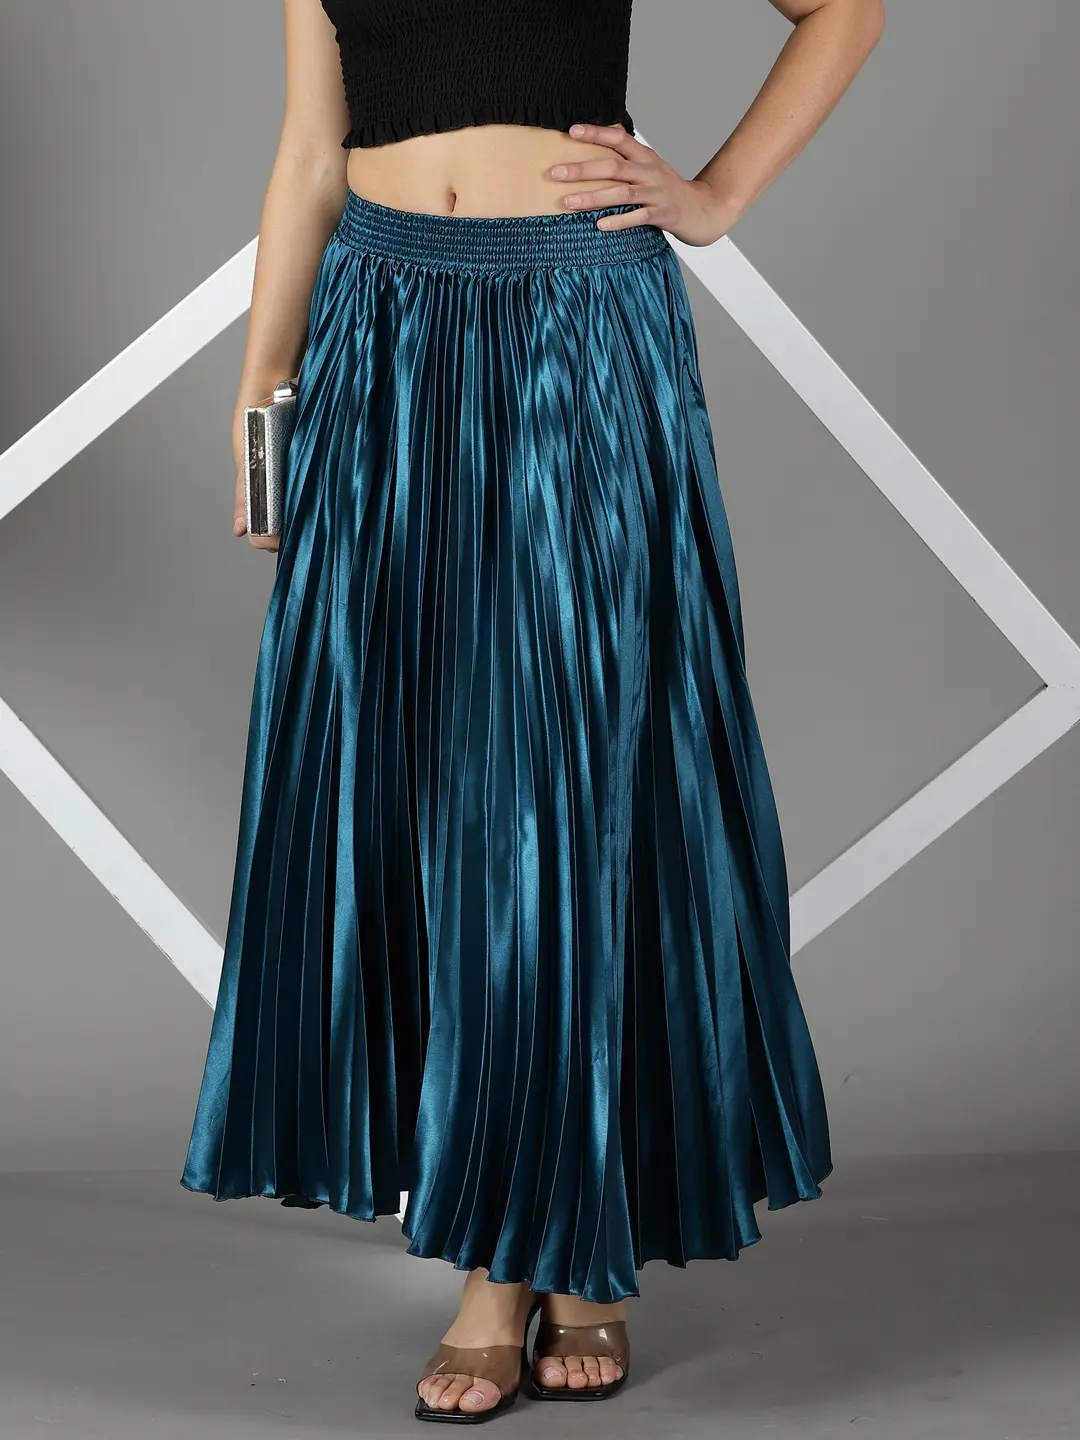 SHOWOFF Women's Solid Teal Satin Flared Skirt